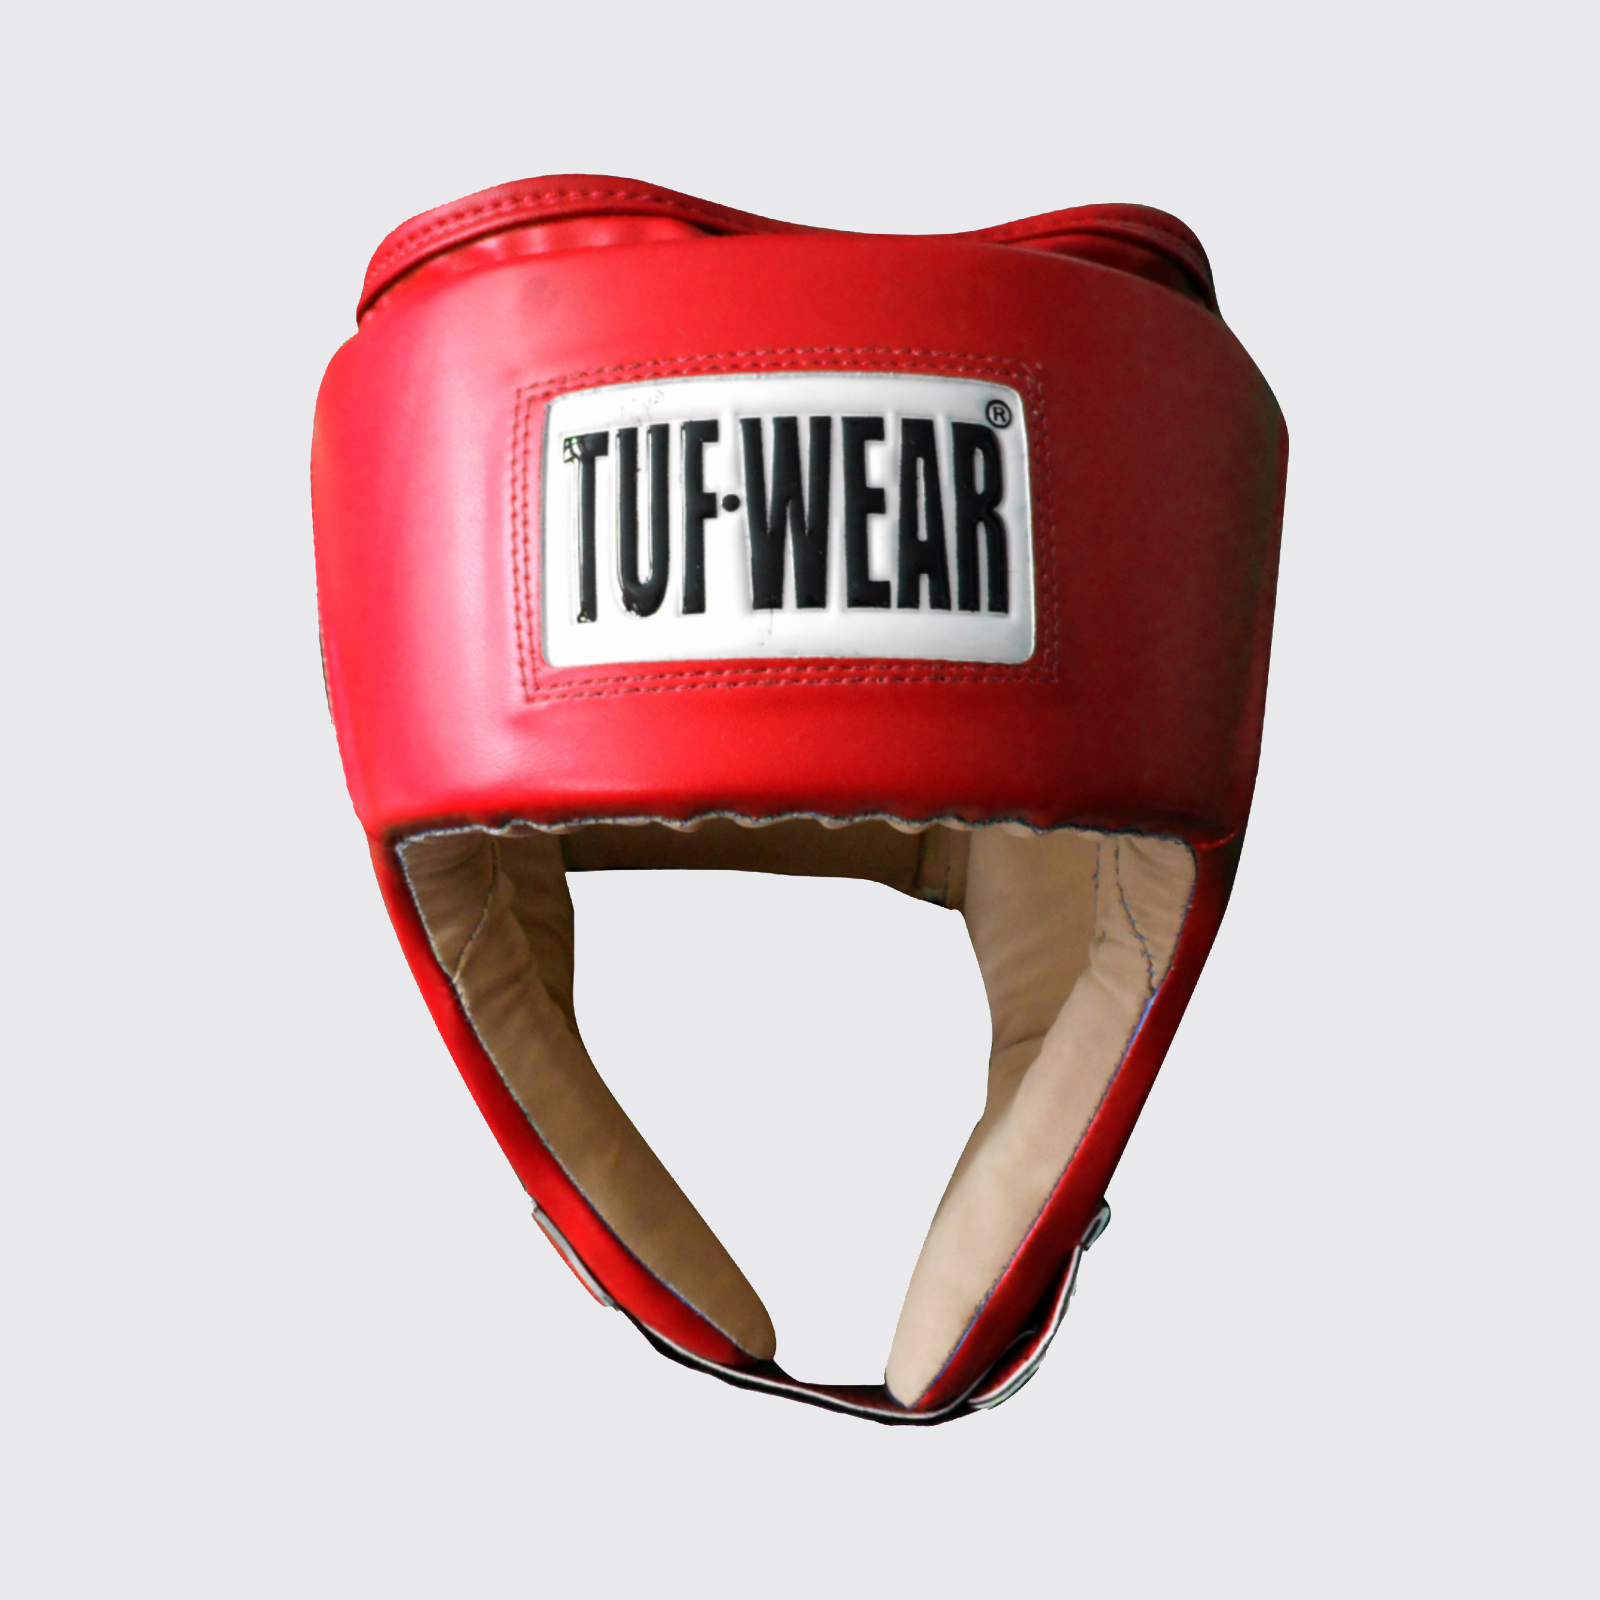 Details about   Tuf Wear Full Face Boxing Head Guard Leather MMA Sparring Kickboxing head Gear 